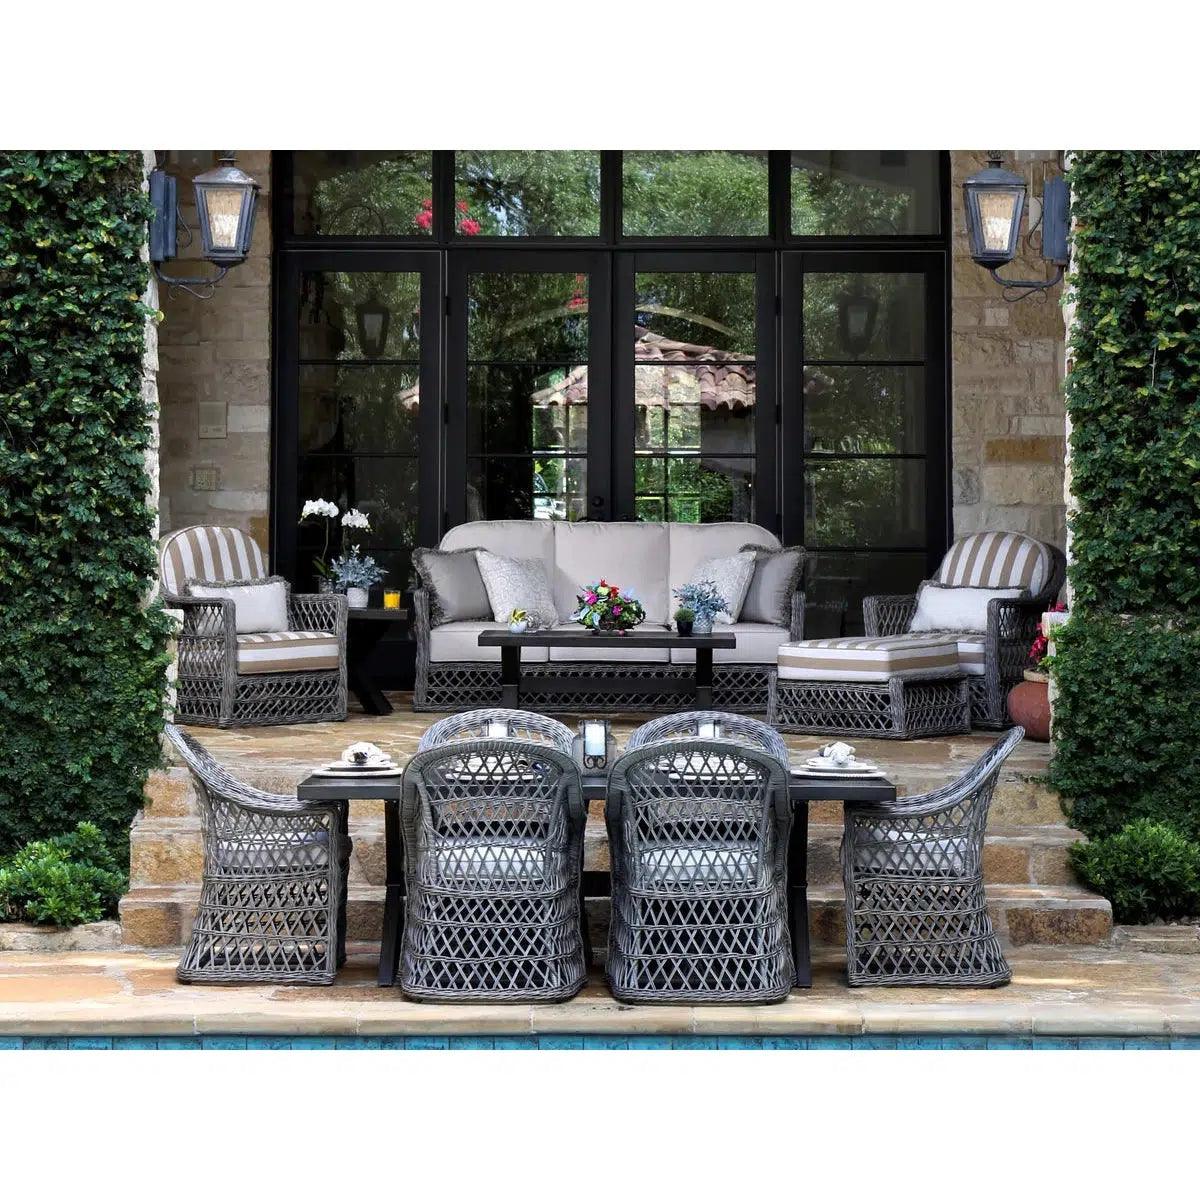 Rectangular 7PC Outdoor Dining Set Wicker Armchairs - Sideboards and Things Brand_America's Backyards, Color_Black, Features_Indoor/Outdoor Use, Metal Type_Aluminum, Number of Pieces_7PC Set, Product Type_Dining Height, Product Type_Outdoor Dining Set, Product Type_Table/Nook Set, Seating Capacity_6, Shape_Rectangular, Table Base_Metal, Table Top_Metal